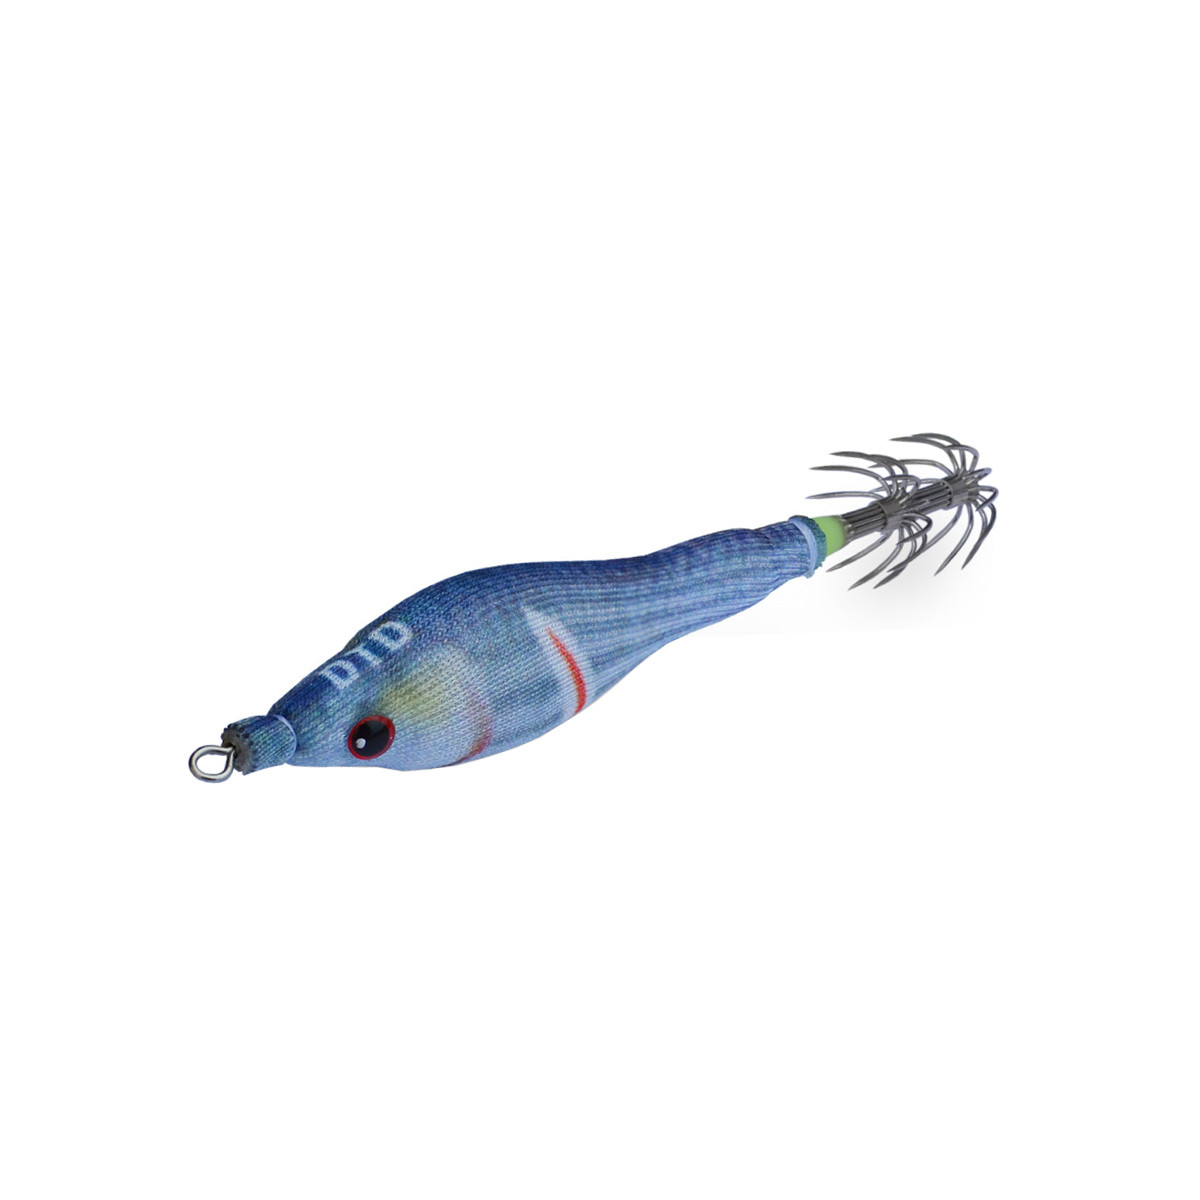 DTD SOFT WOUNDED FISH 2.0